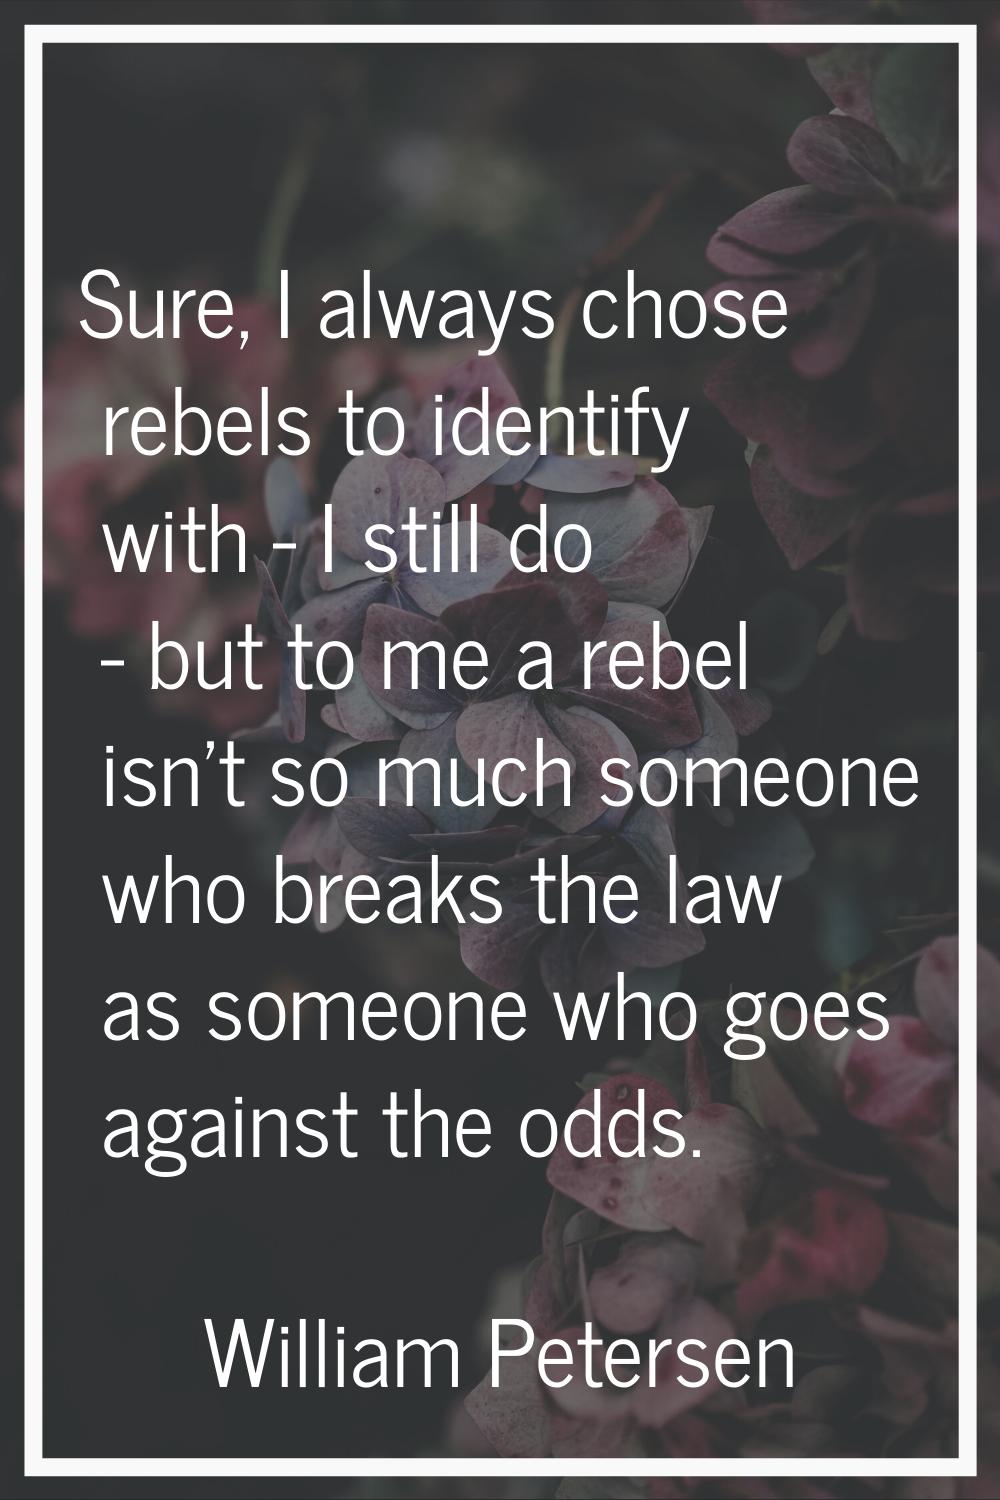 Sure, I always chose rebels to identify with - I still do - but to me a rebel isn't so much someone